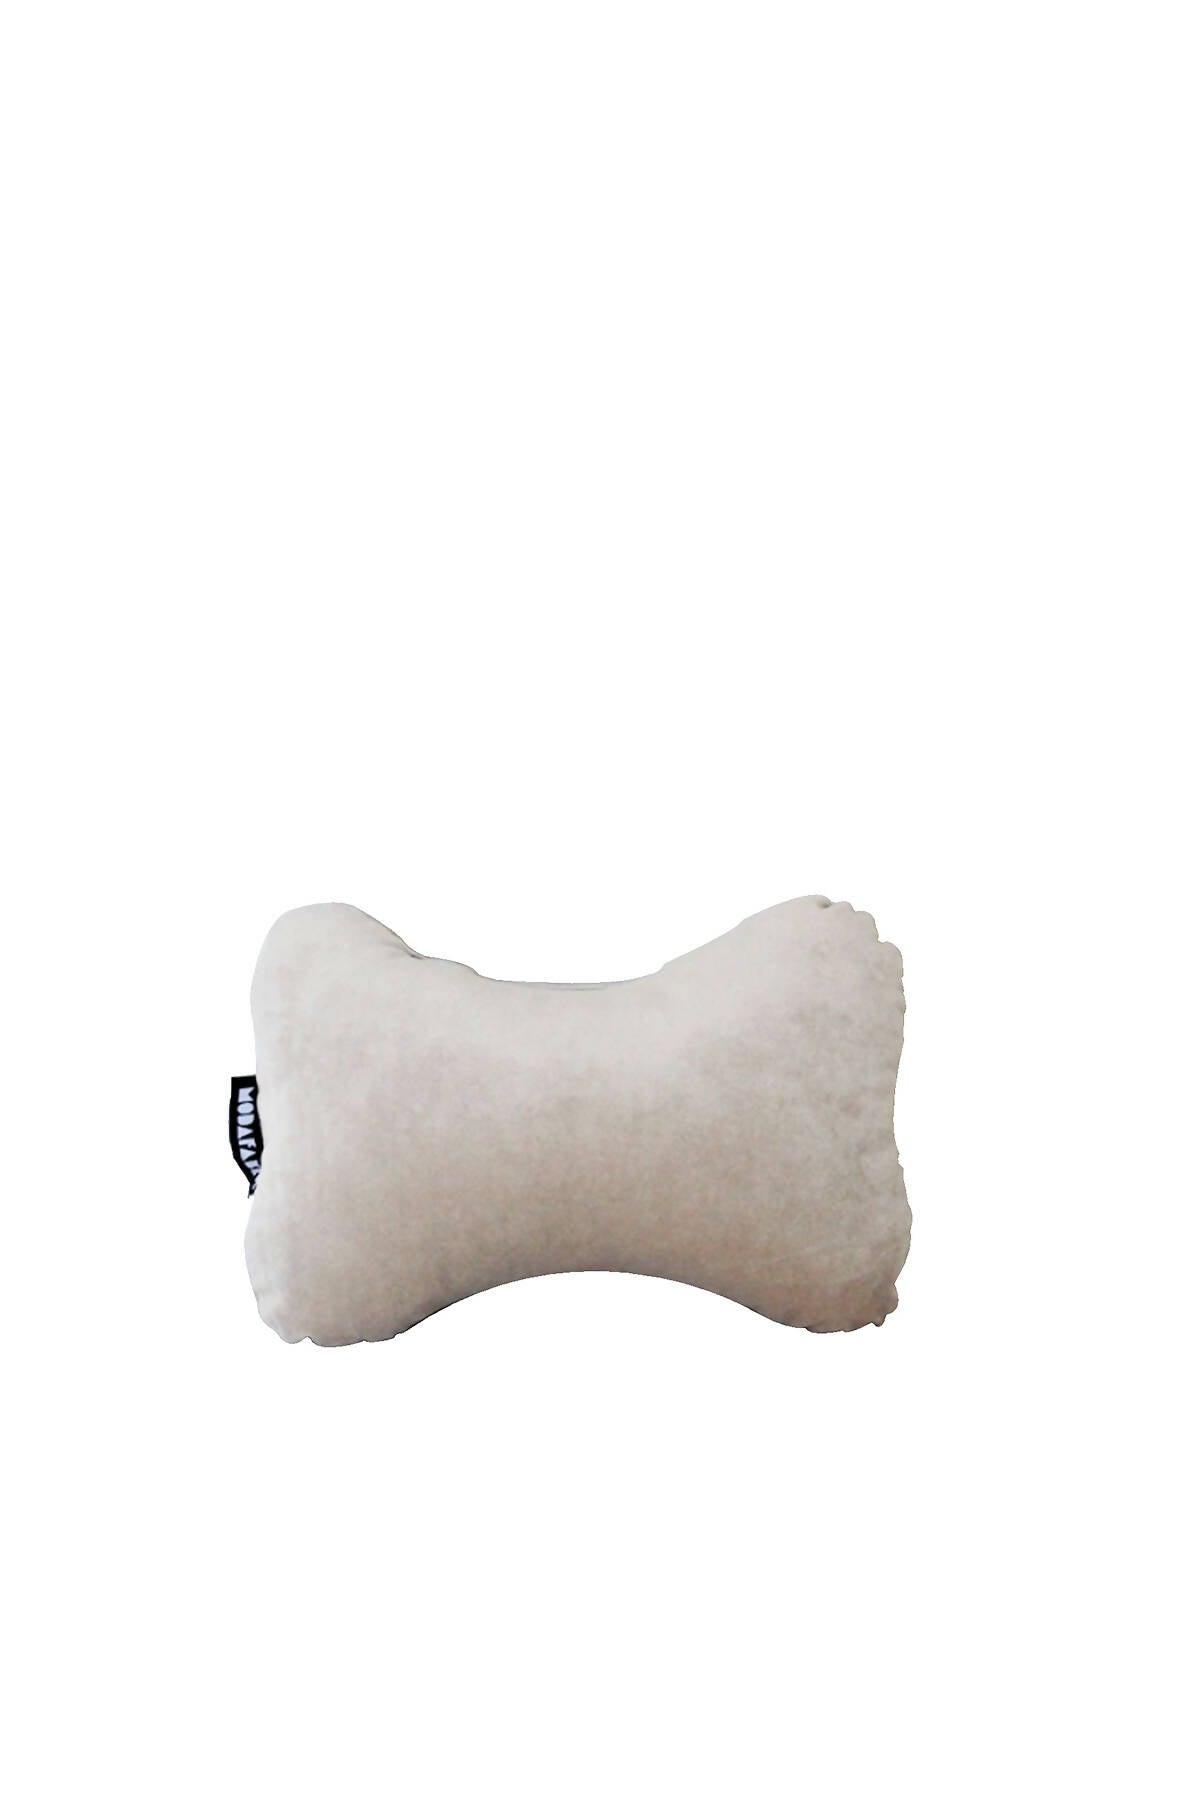 Spine Pillow for Personal